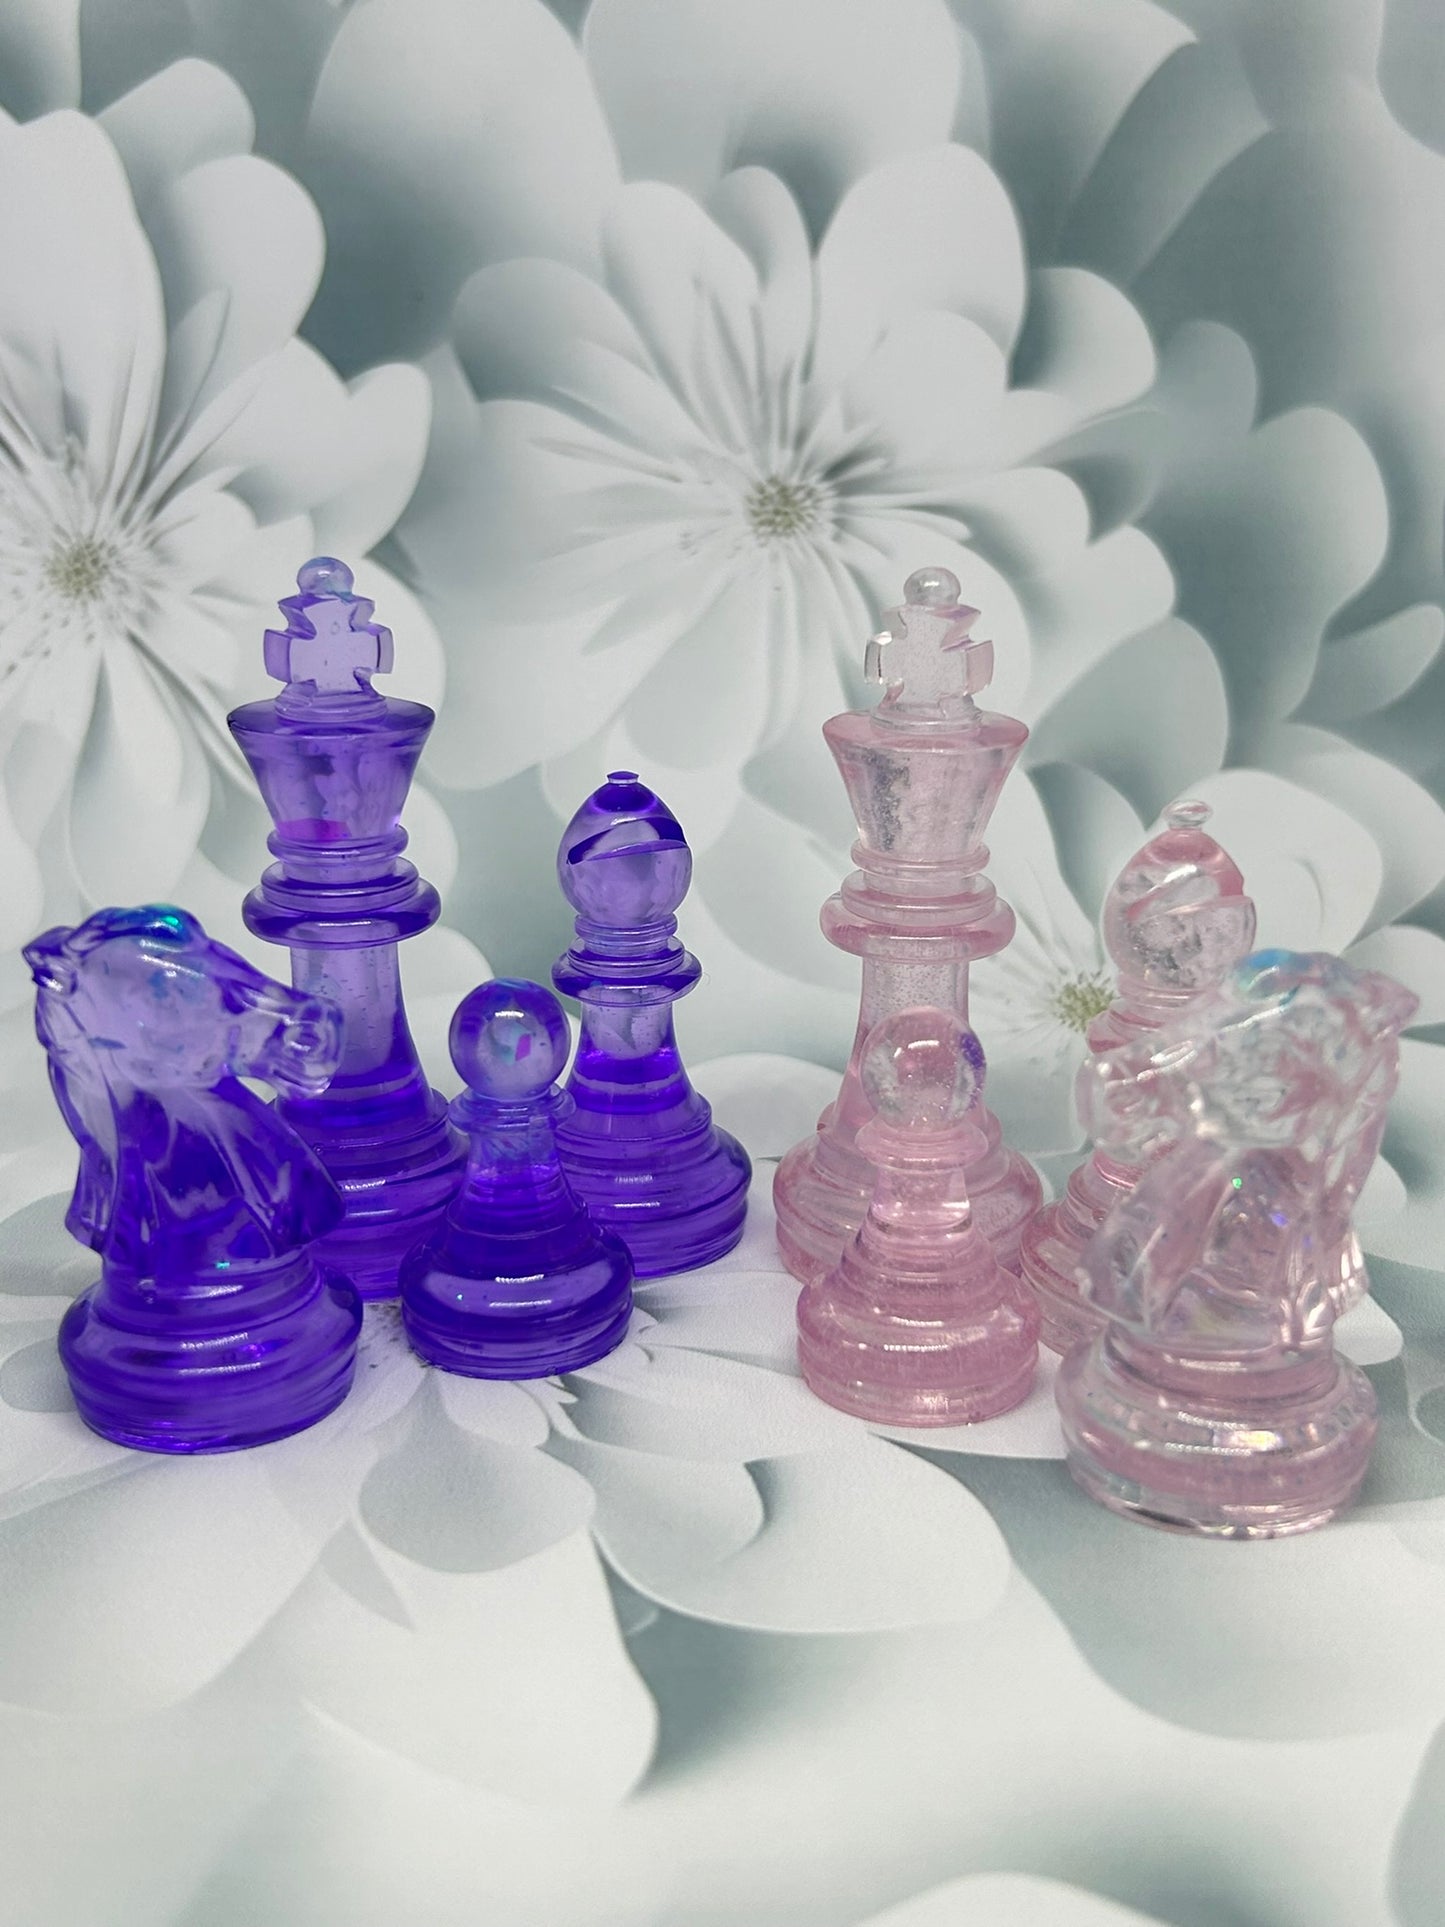 Custom Resin Chess pieces and board